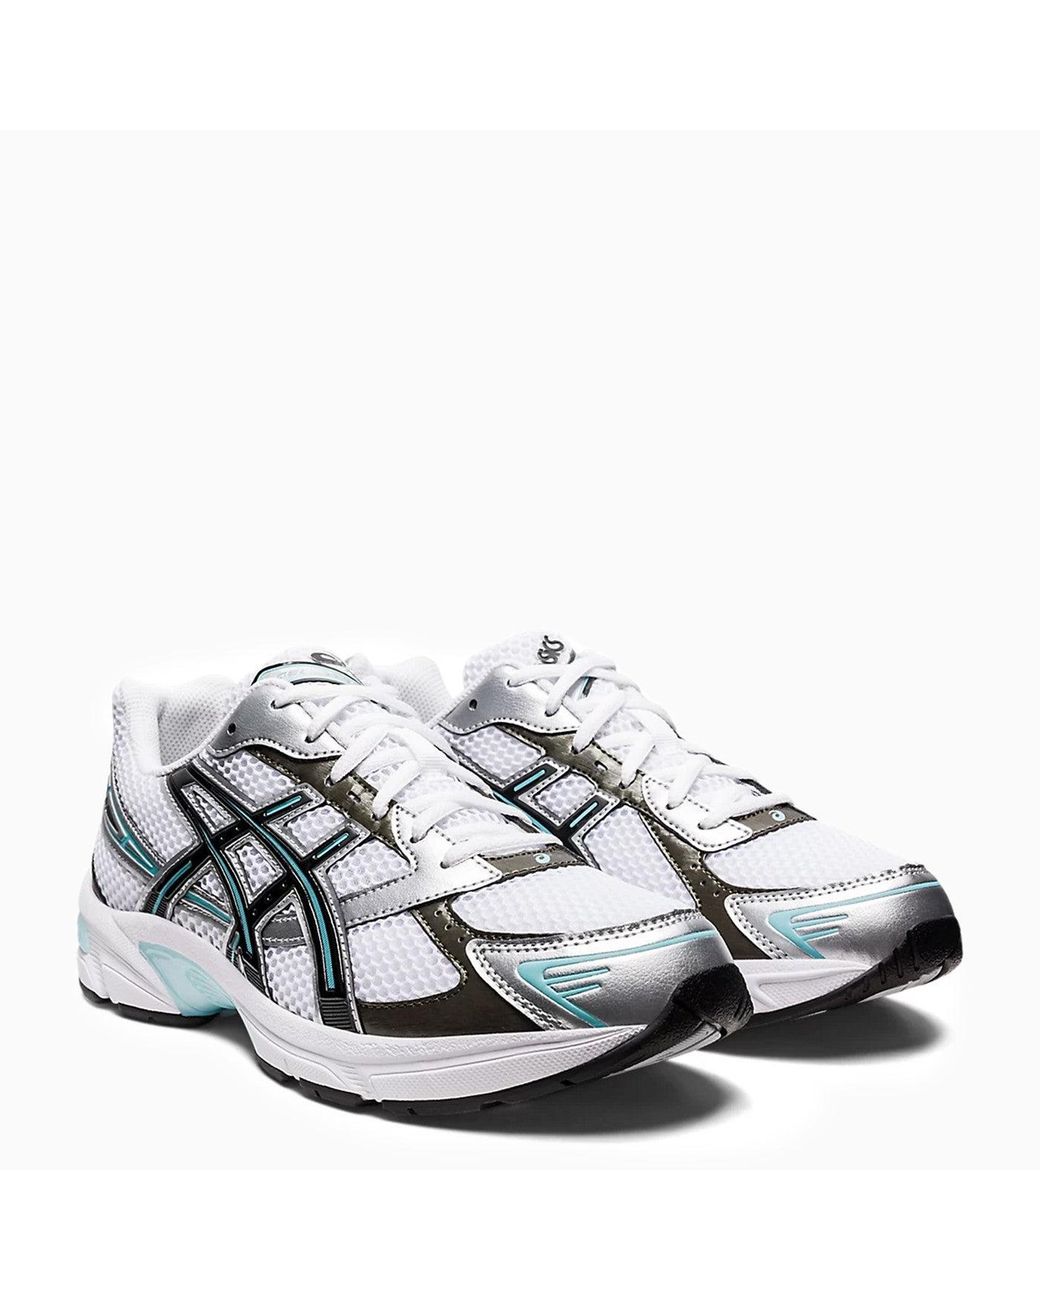 Asics And Silver Gel-1130 Sneakers in Gray | Lyst